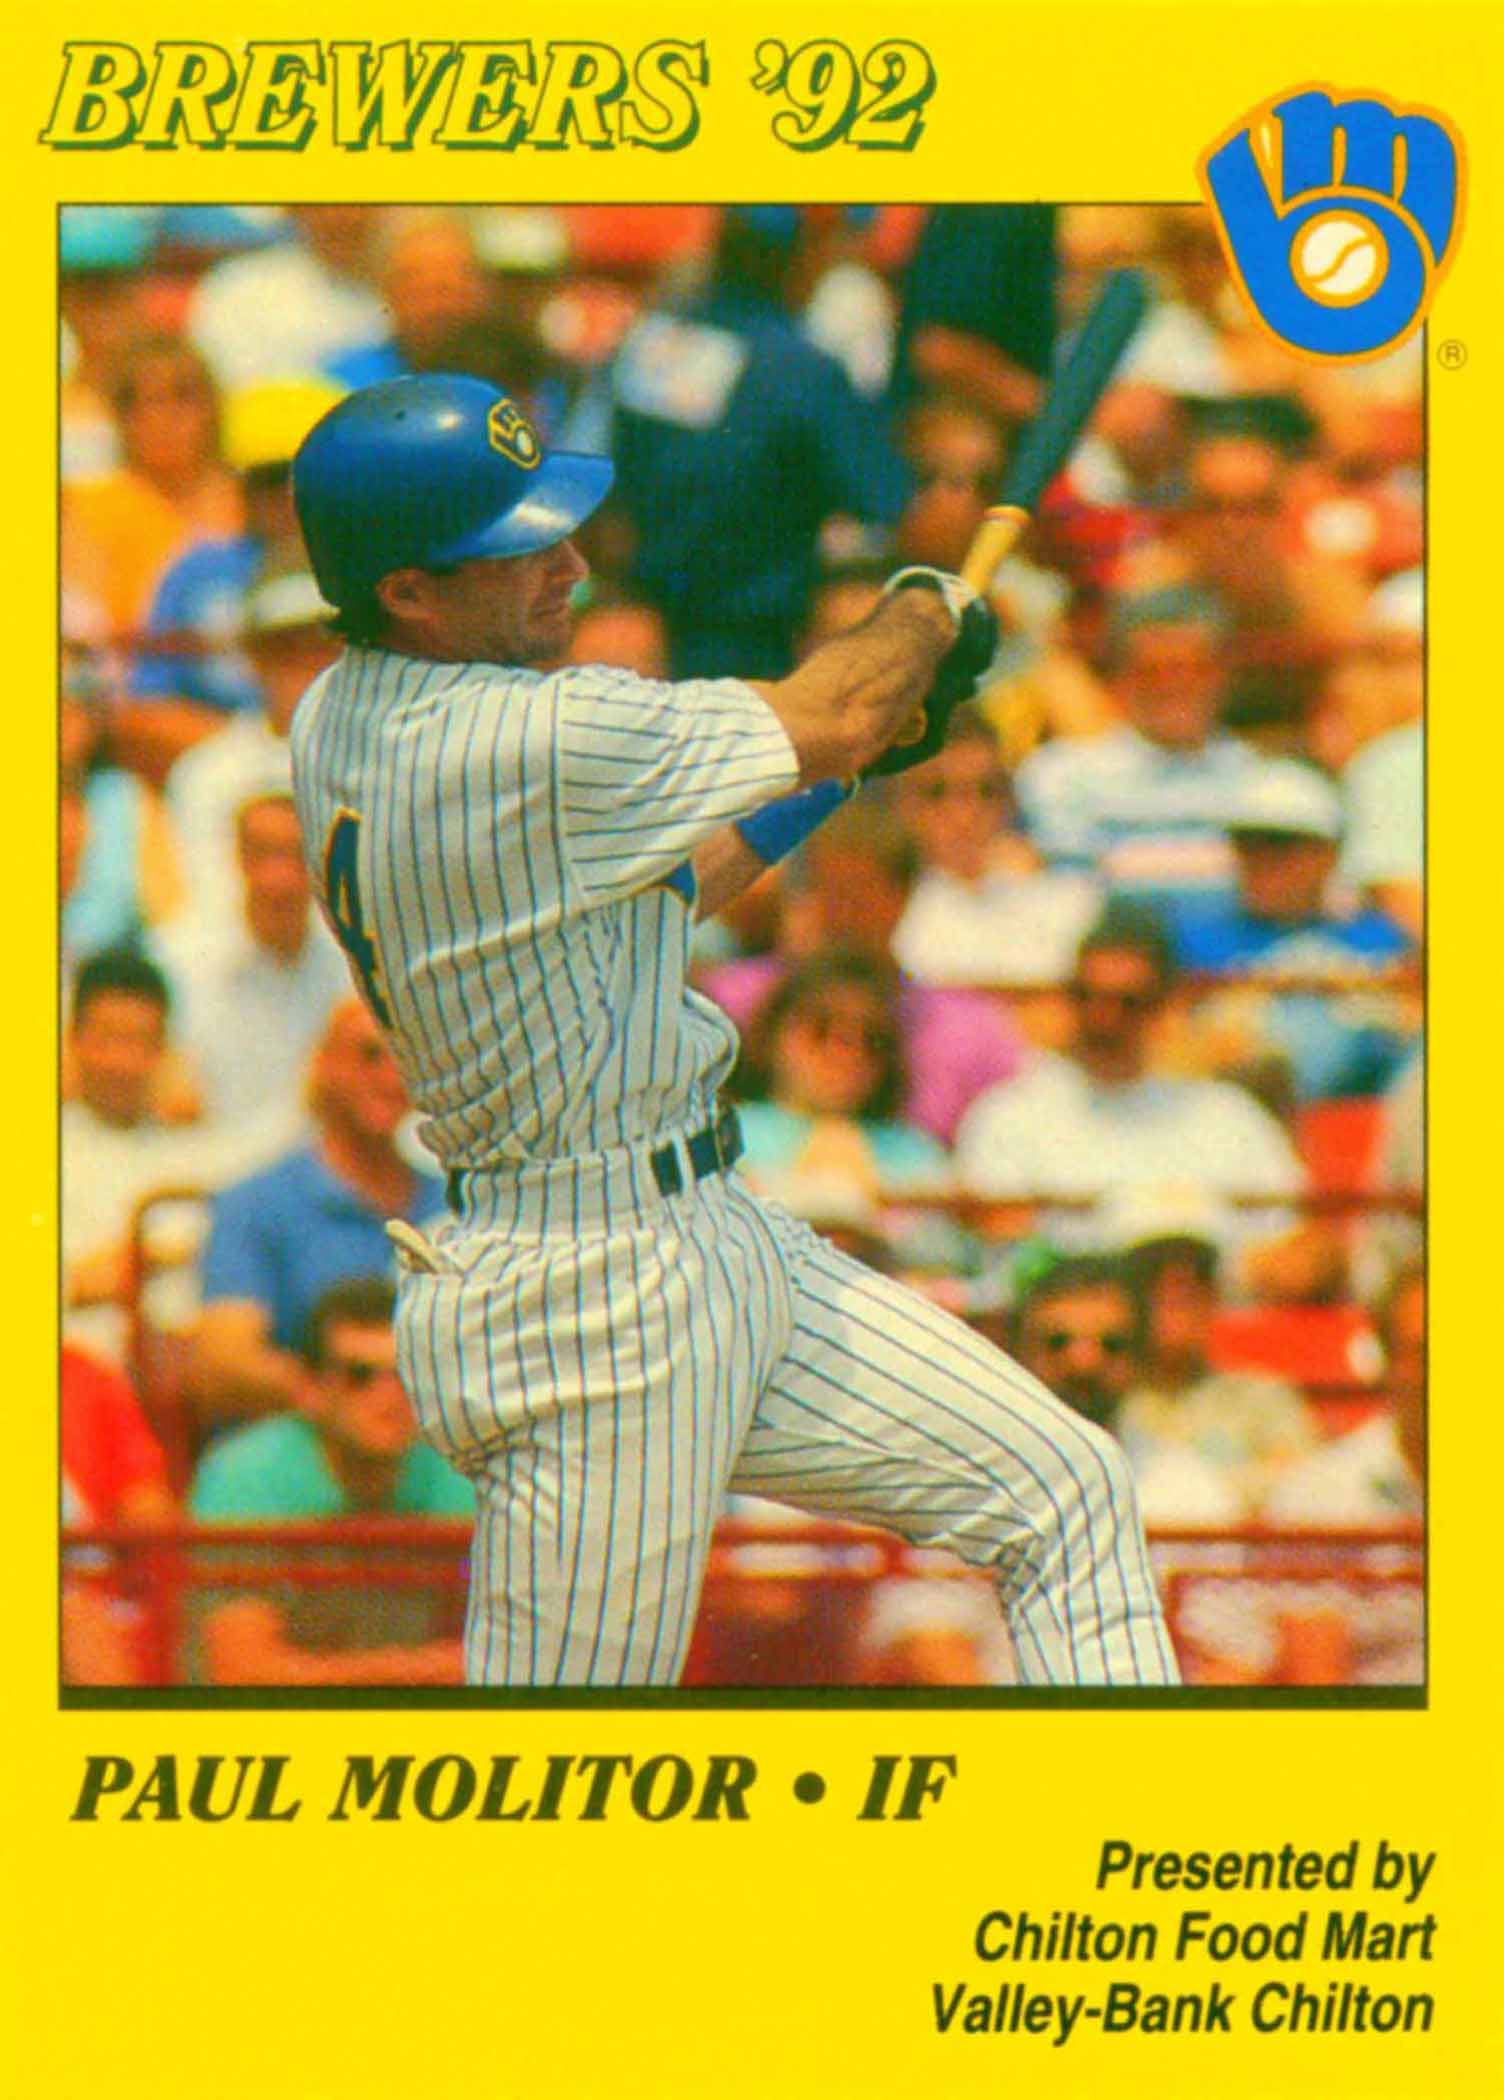 1992 Brewers Police